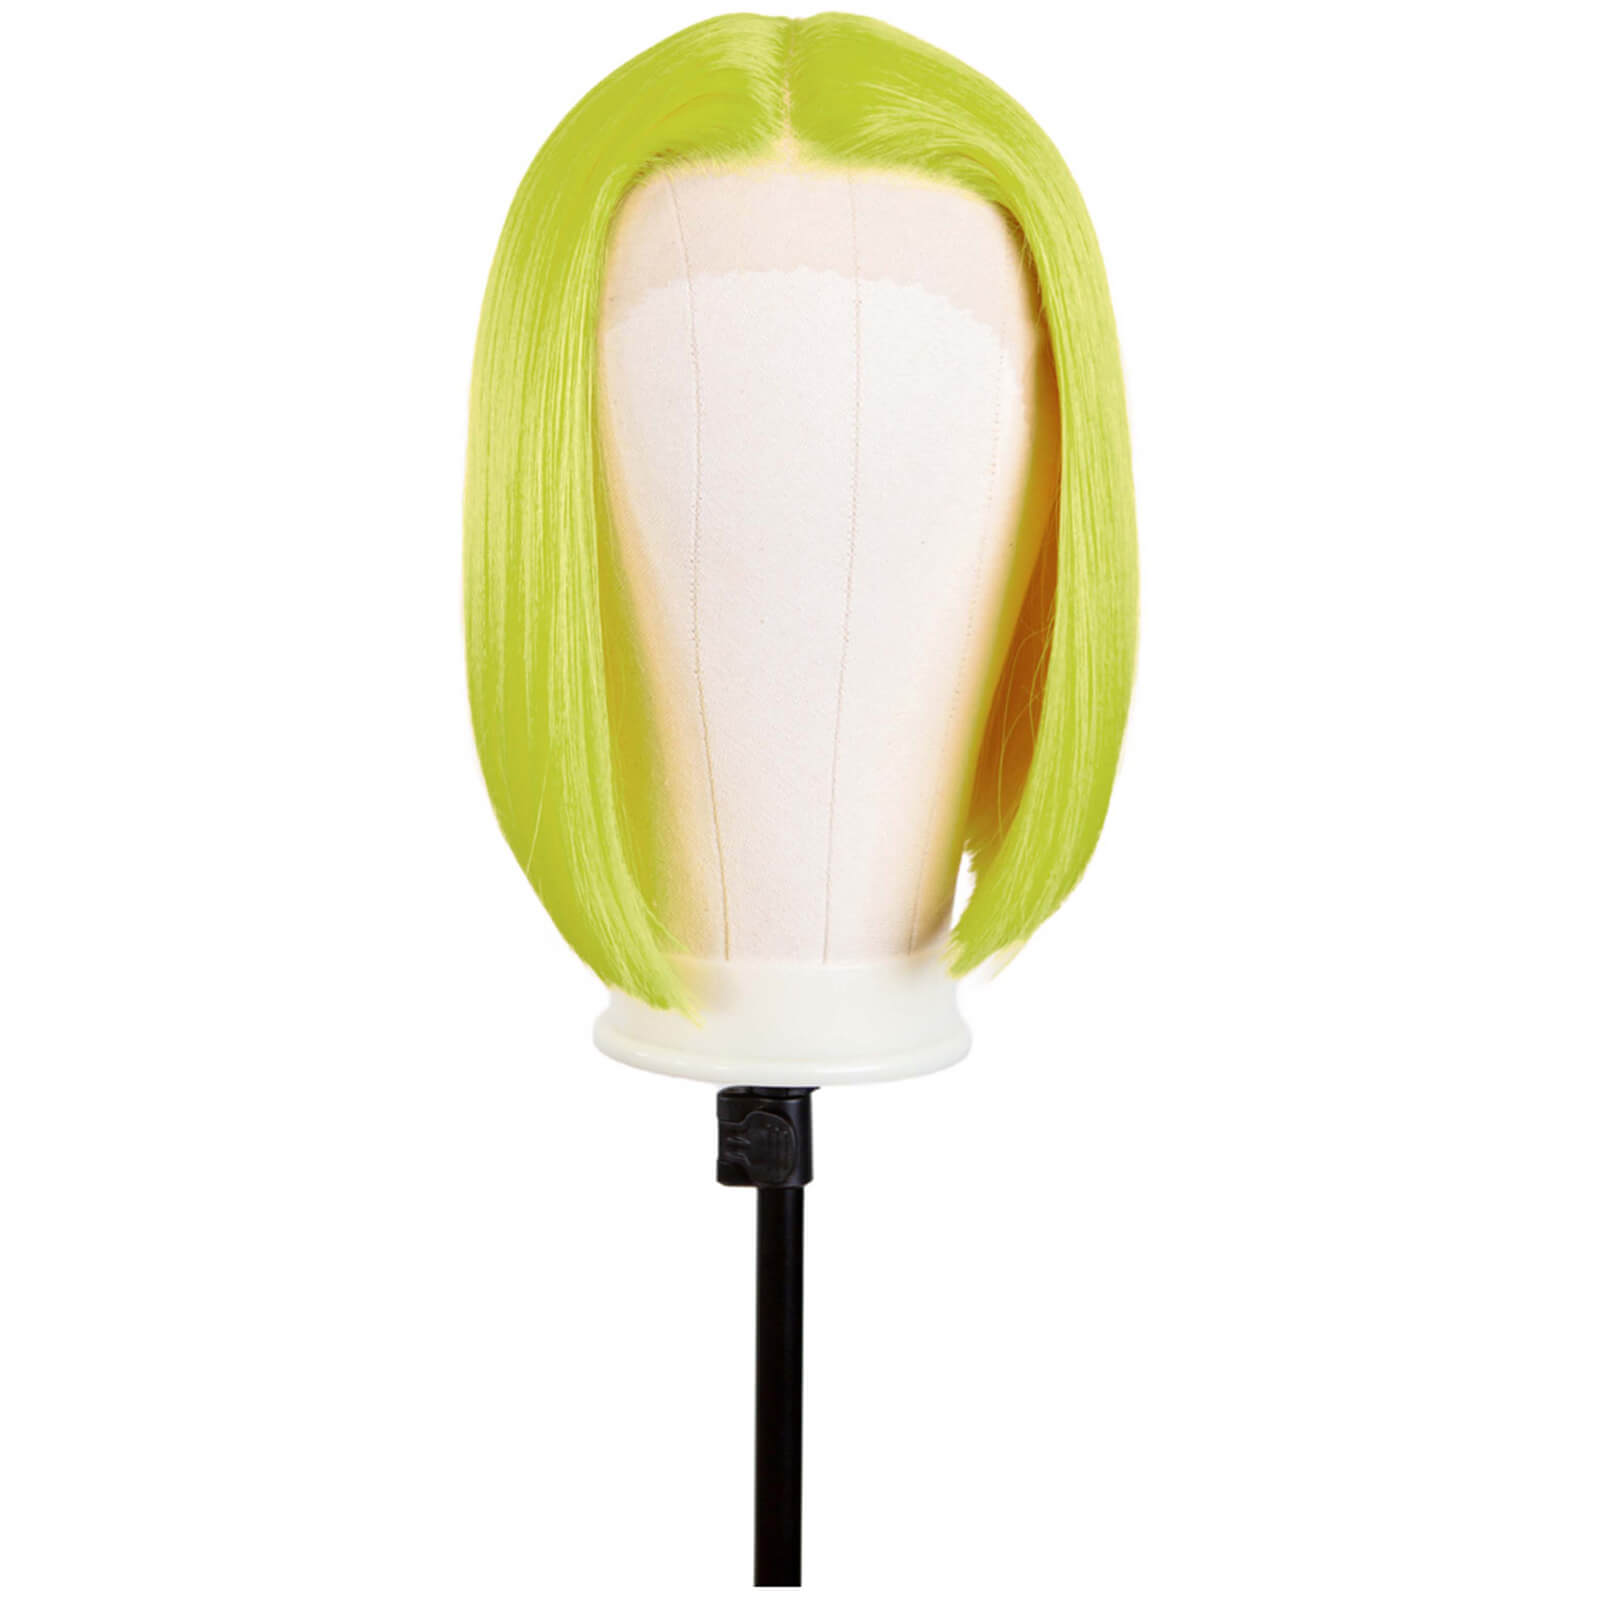 plsLONDON The Anna Bob Lace Frontal Wig (Various Options) - Lime